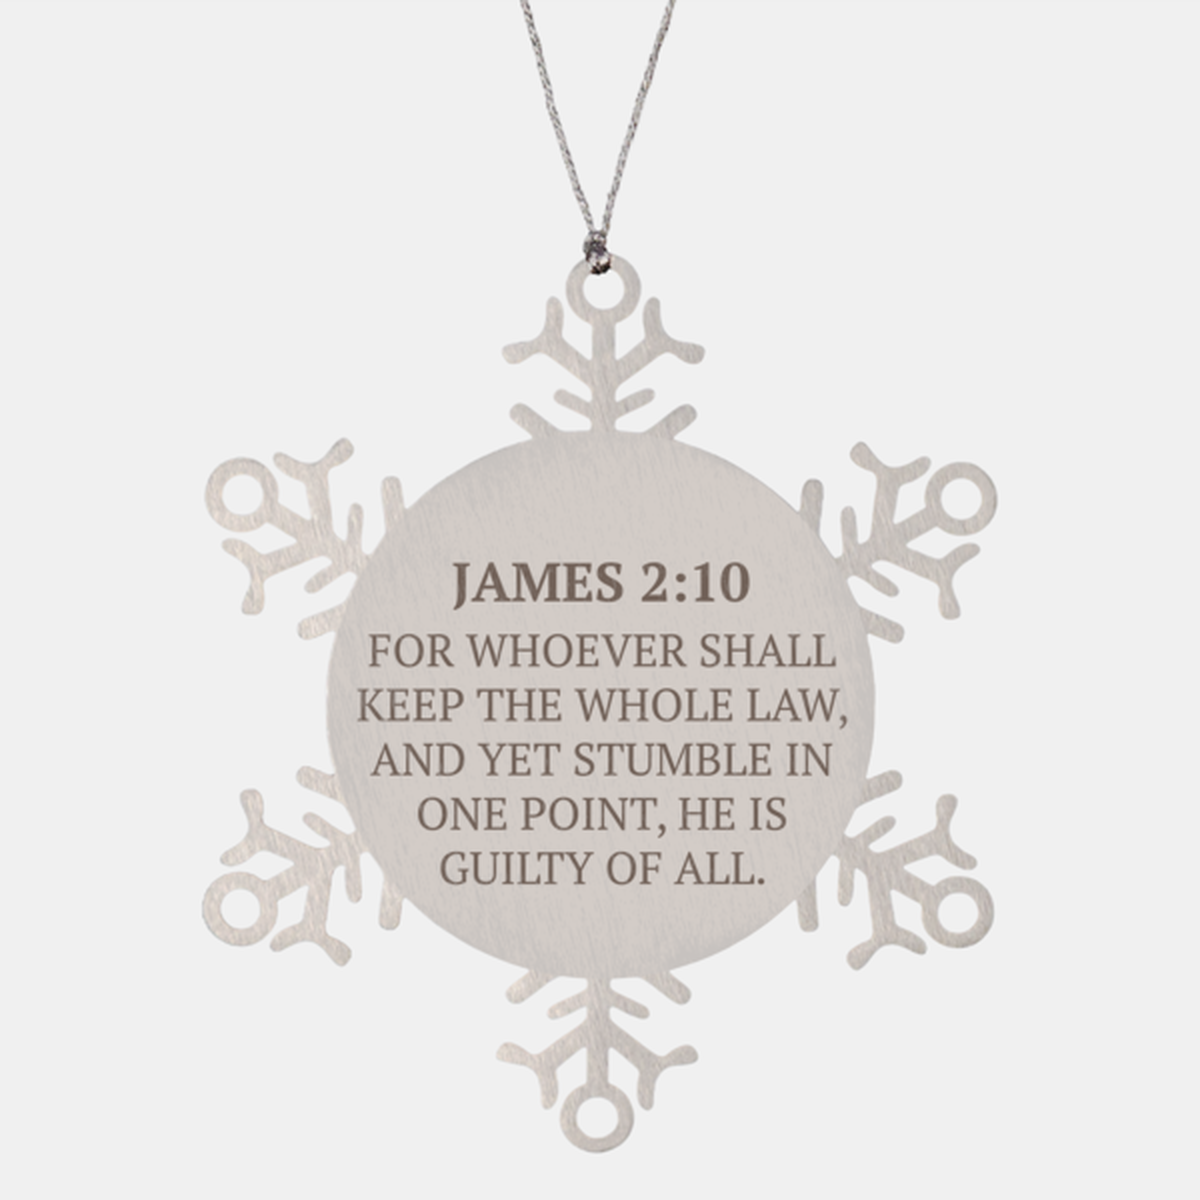 Christian Ornaments For Christmas Tree, For Whoever Shall Keep The Whole Law, Religious Christmas Decorations, Scripture Ornaments Gifts, Bible Verse Ornament